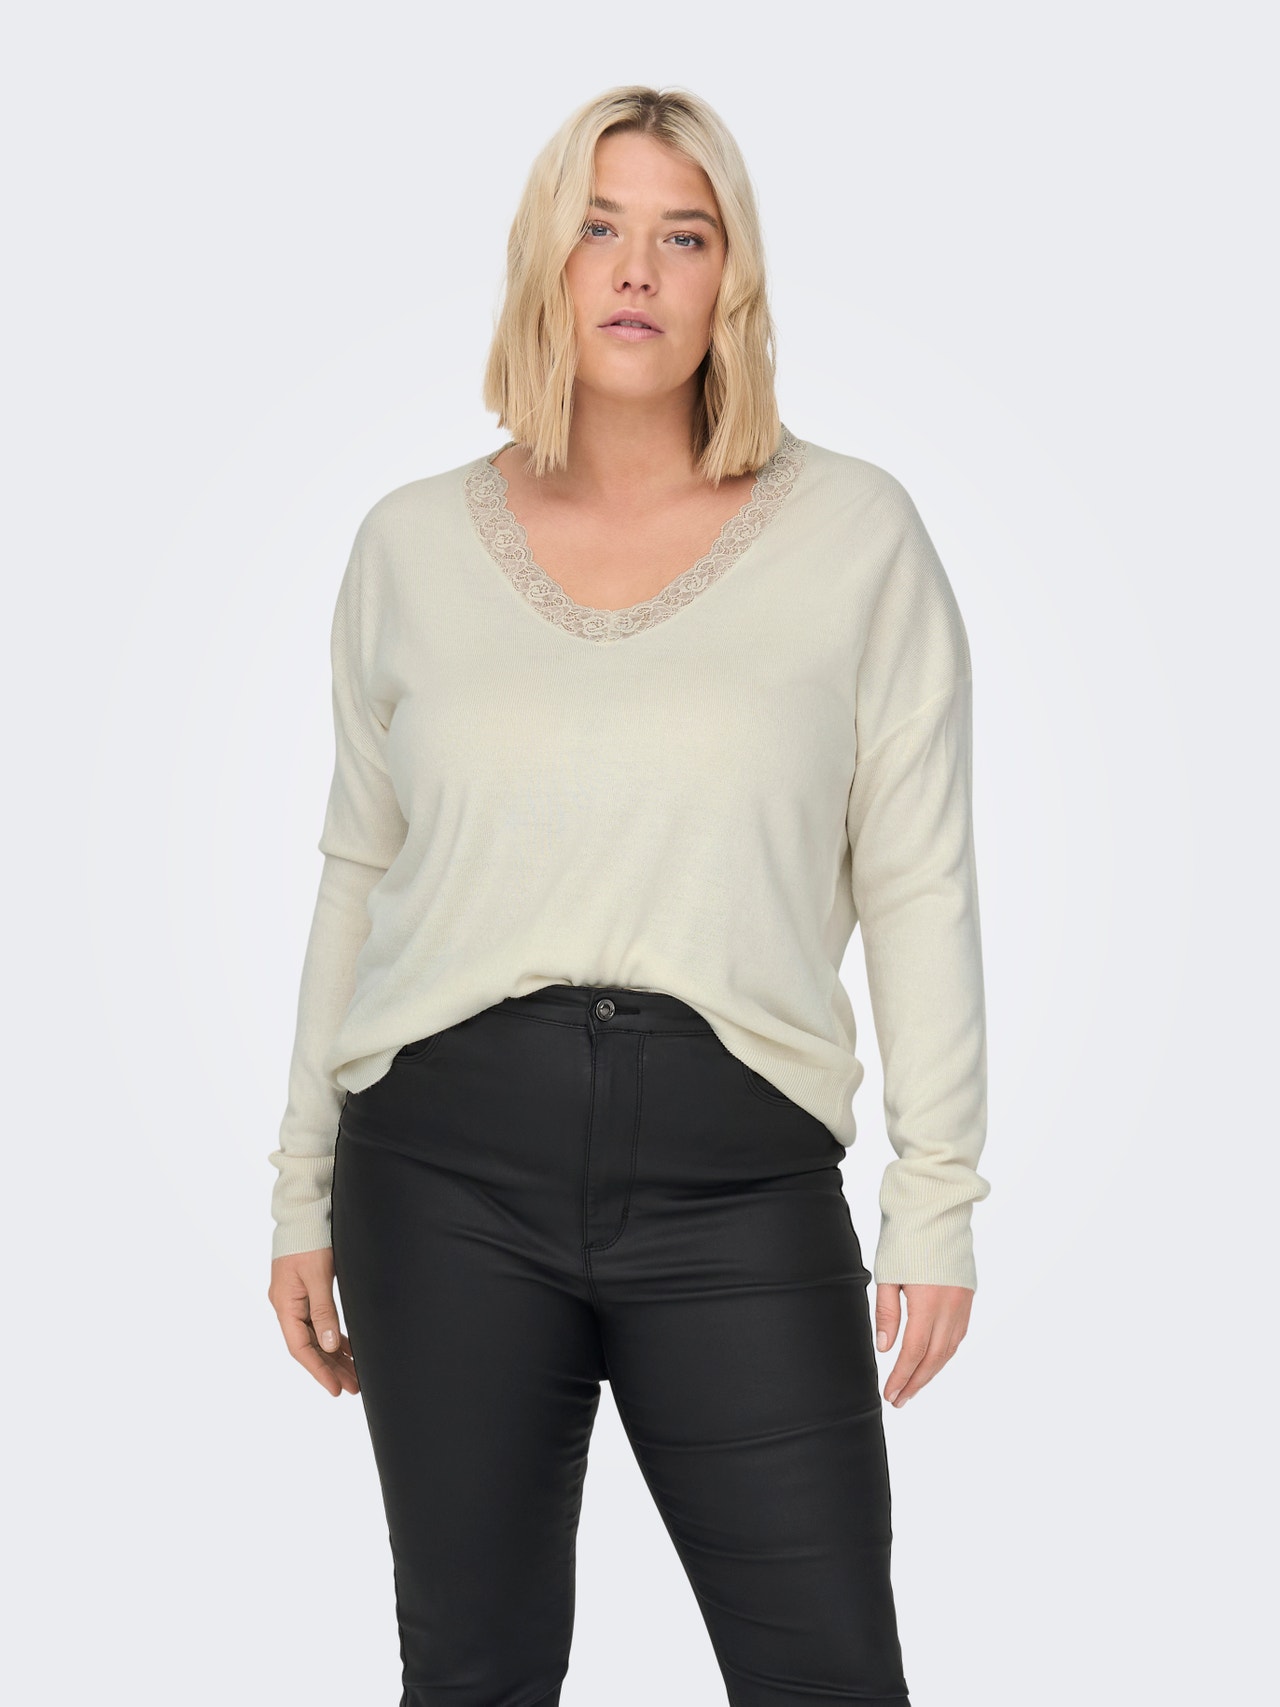 ONLY Pull-overs Col en V Curve -Pumice Stone - 15282843